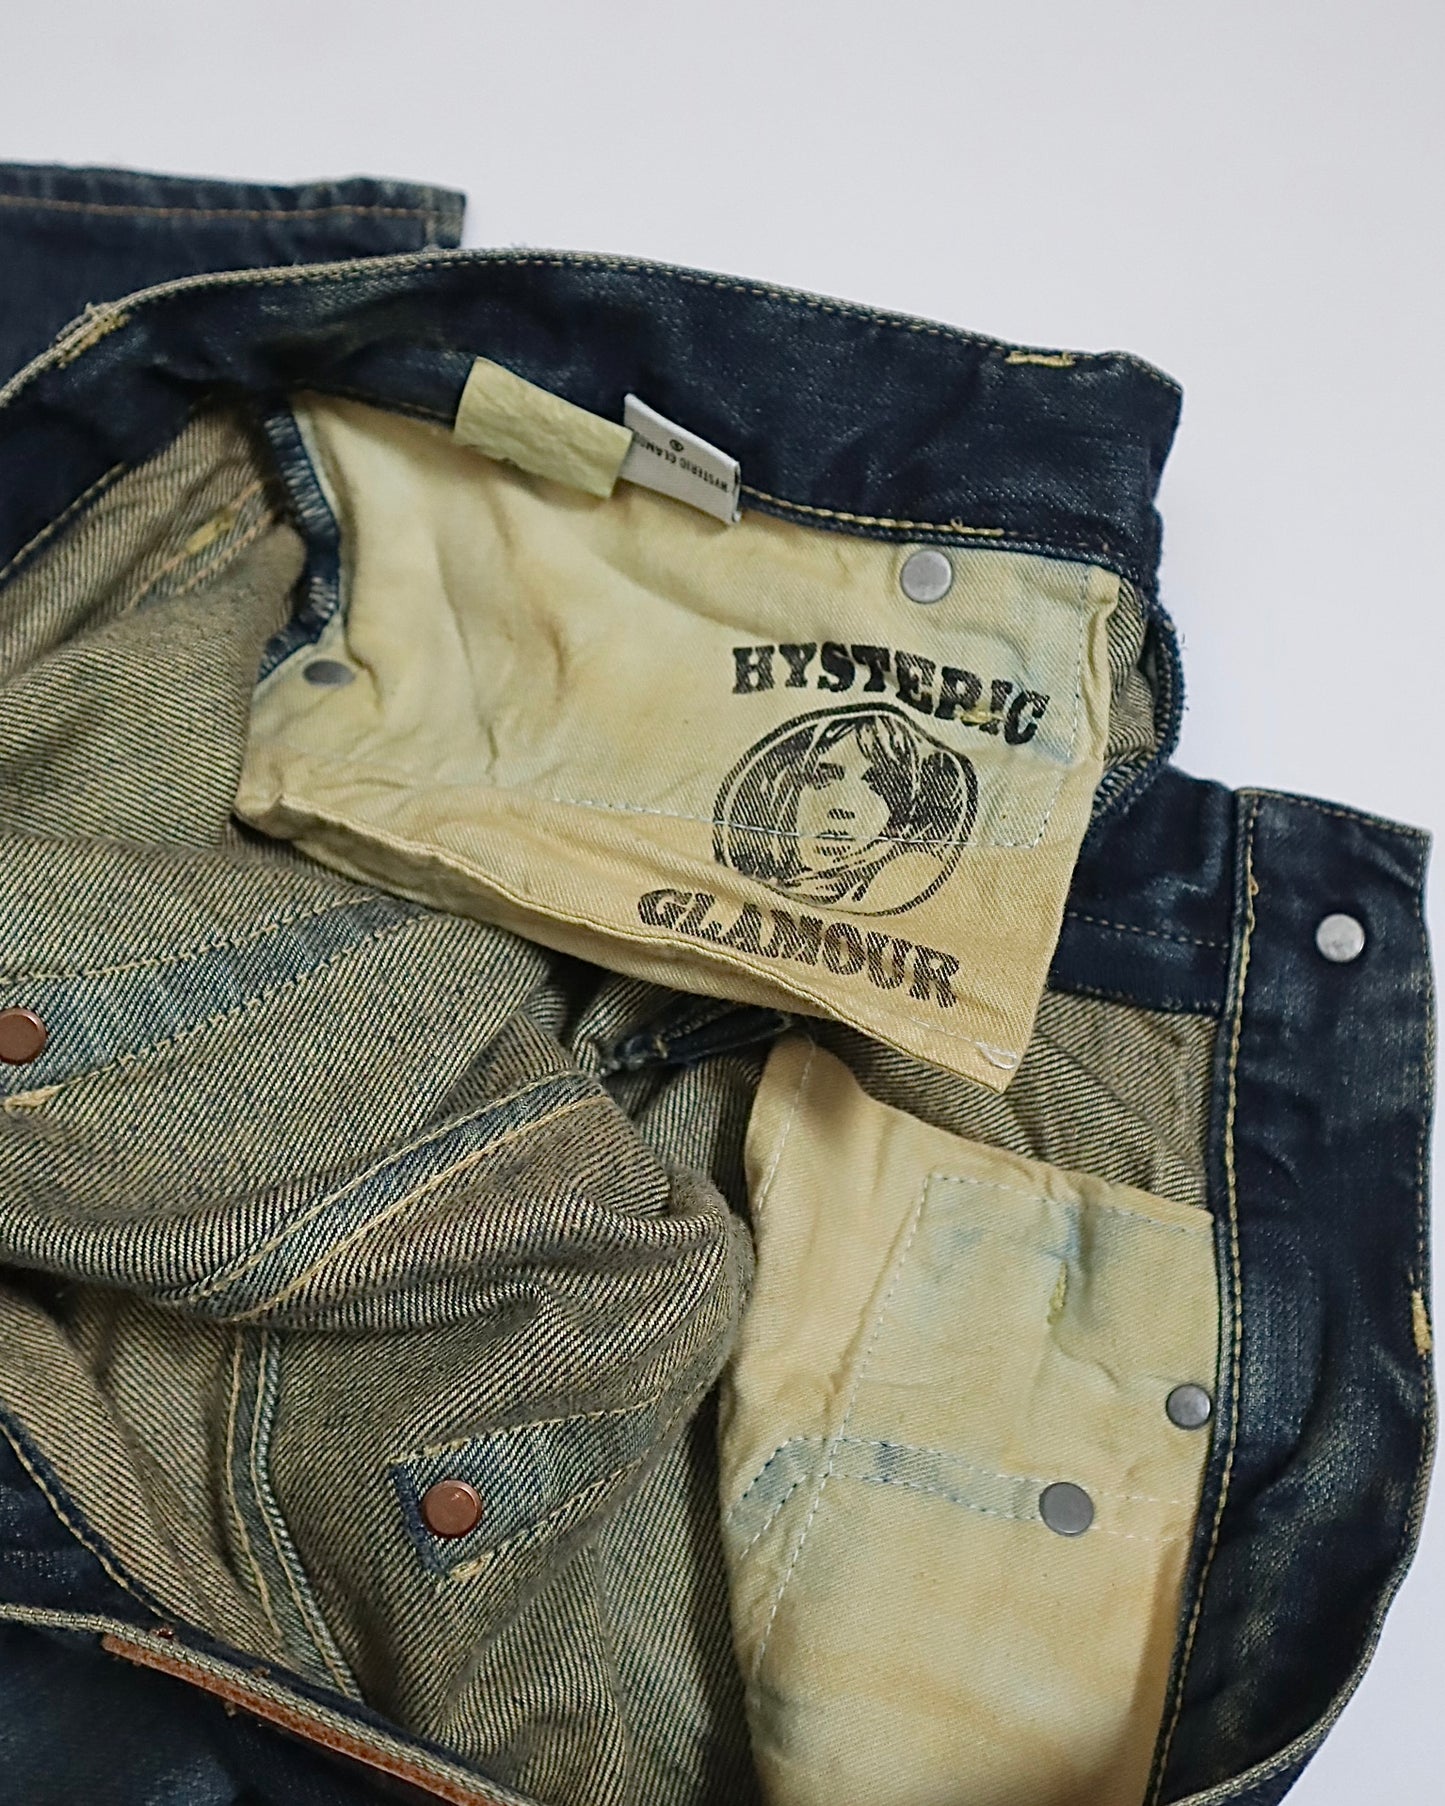 Hysteric Glamour Studded Sample Jeans